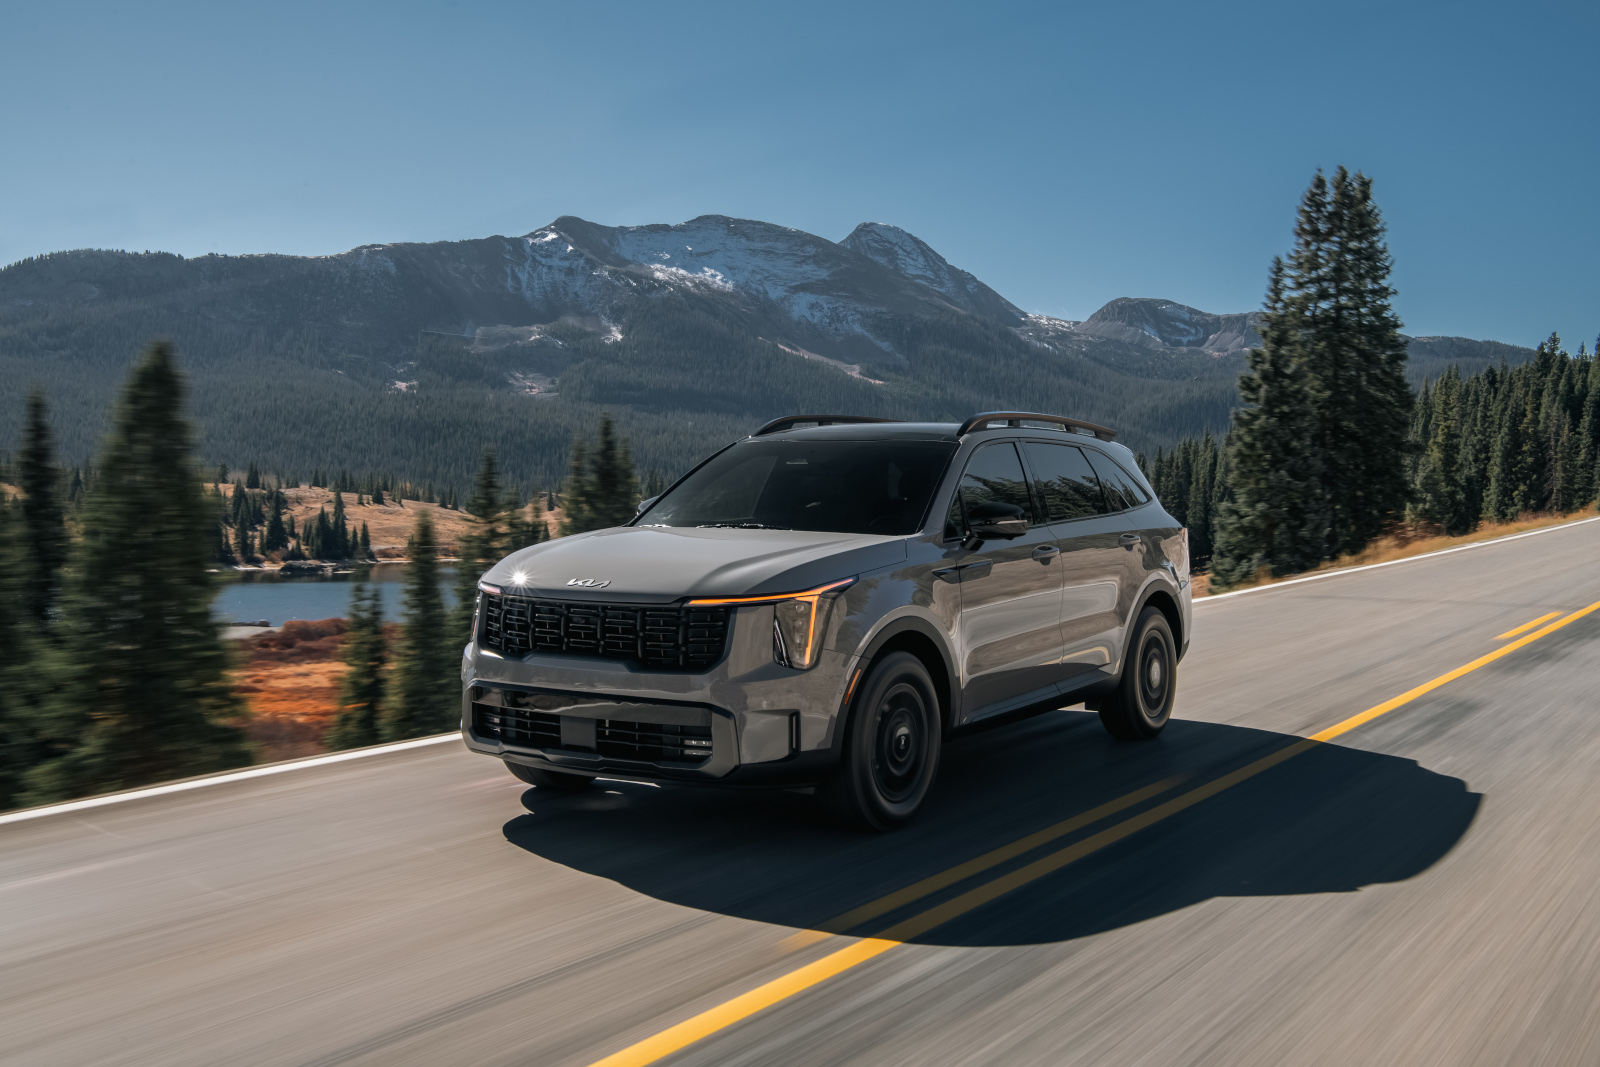 The 2024 Kia Sorento's Advanced Features are Designed for Performance in Winter